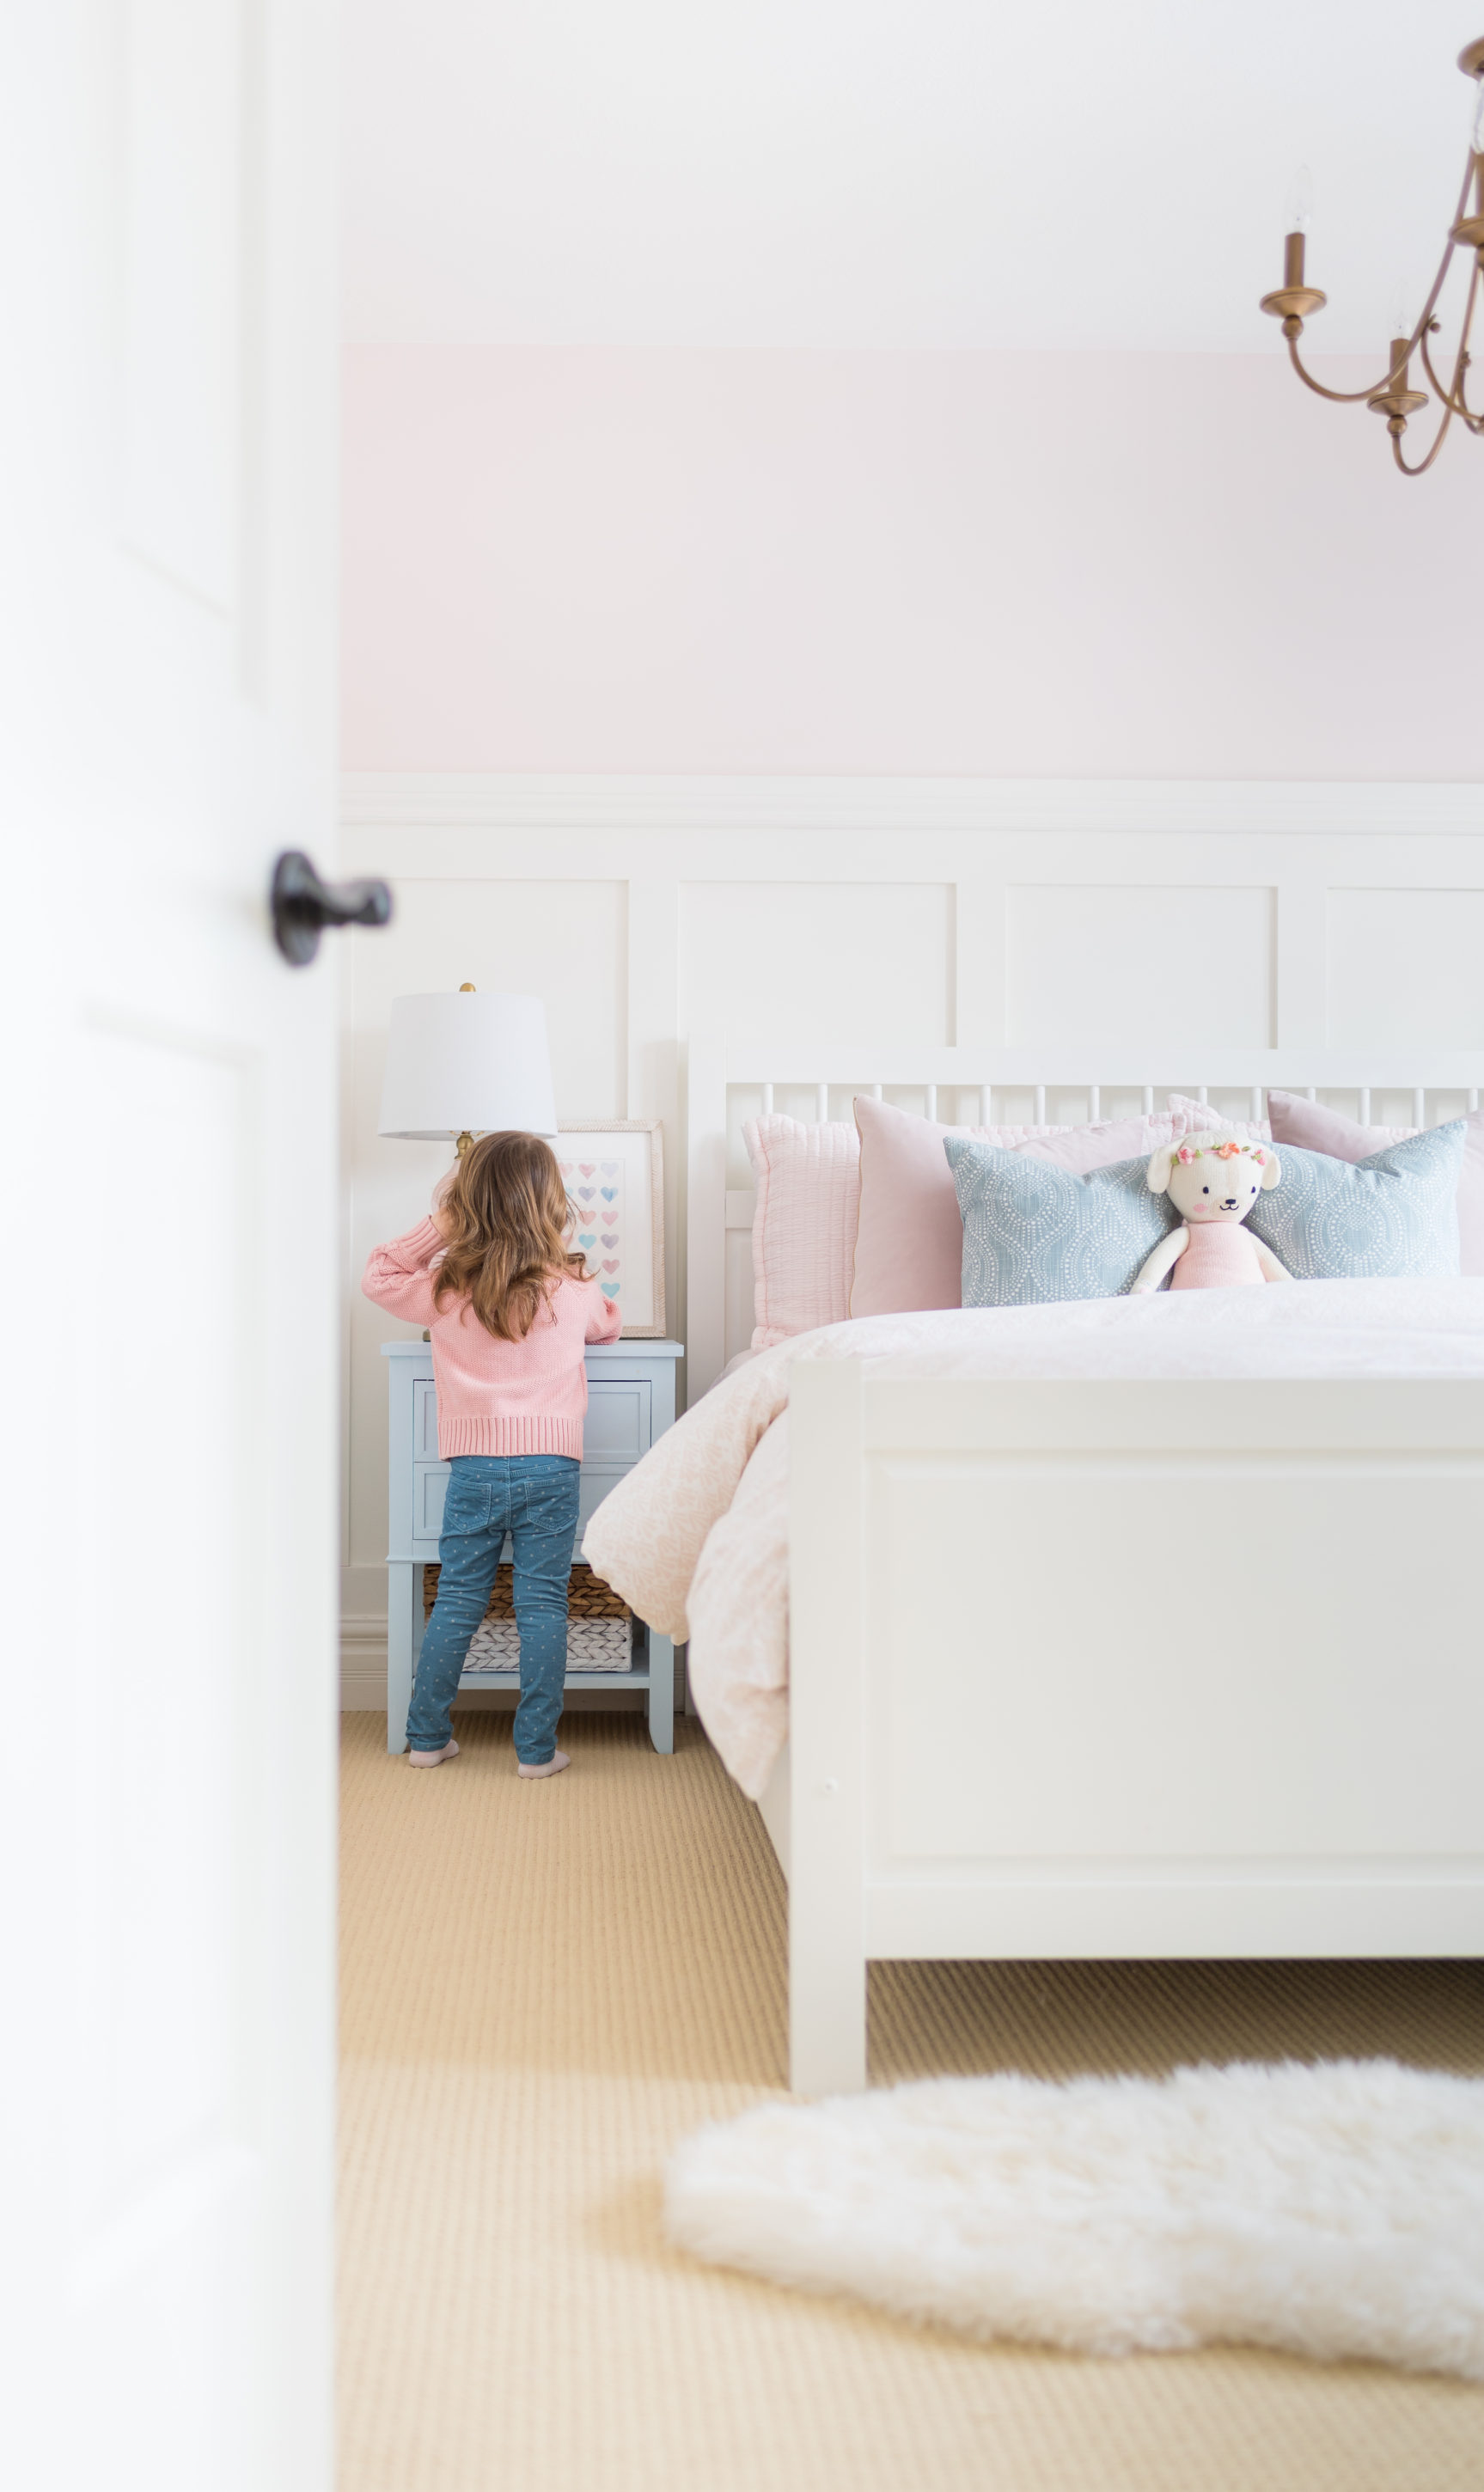 How To Choose The Best Rug For A Nursery Or Child S Bedroom